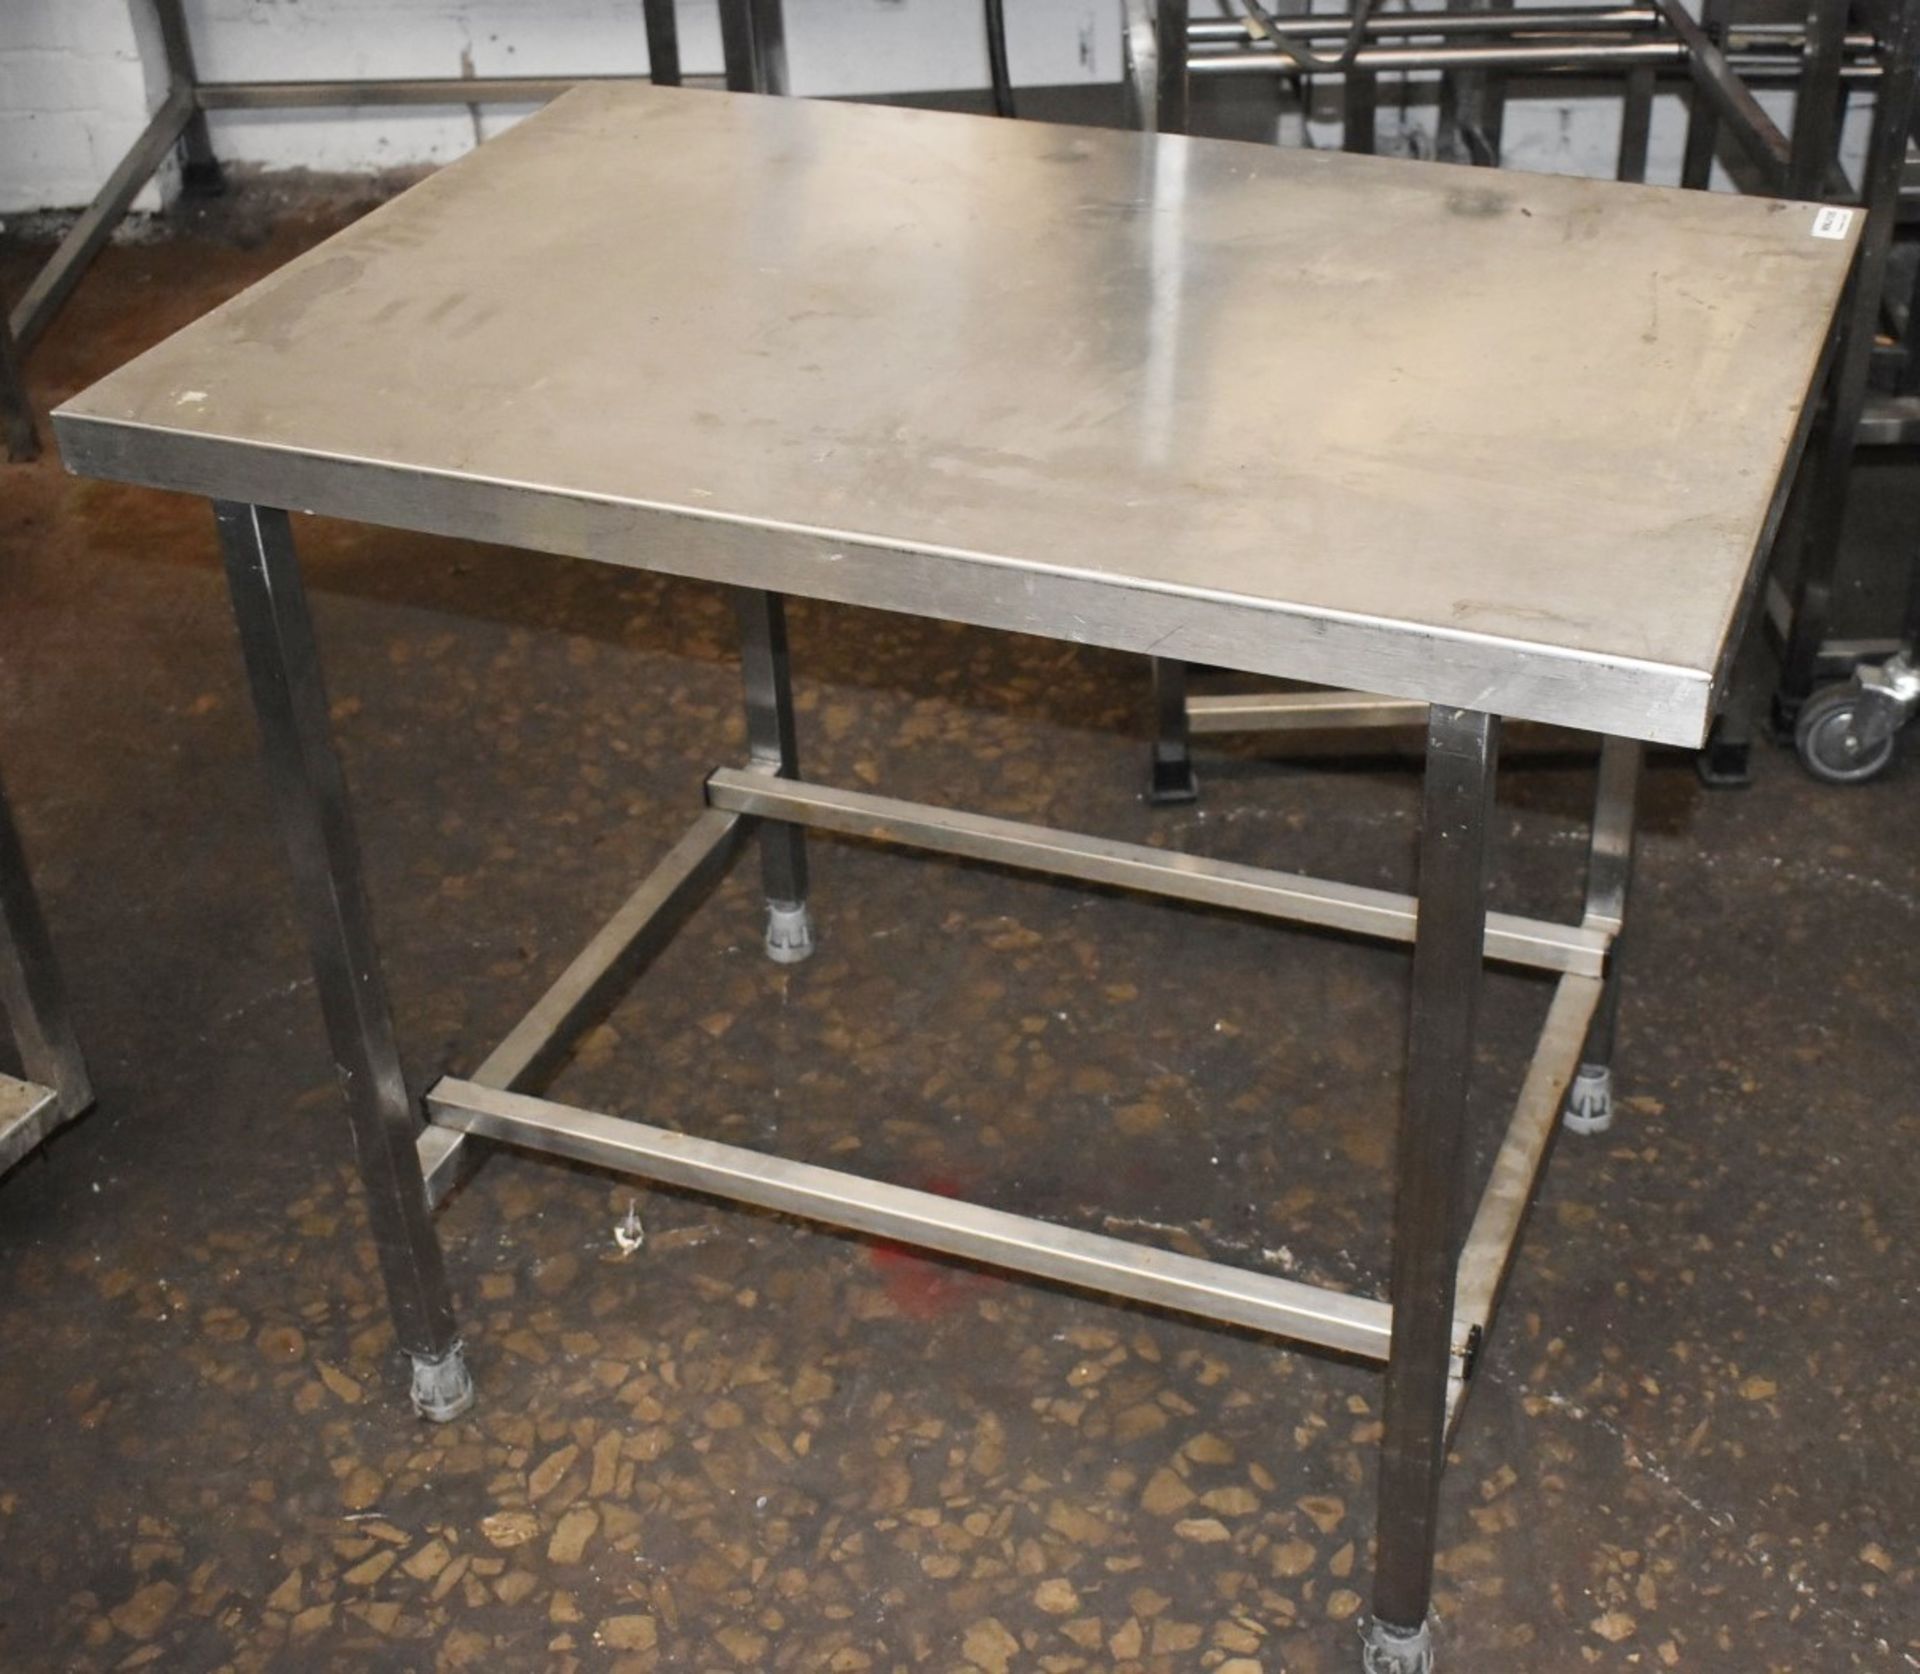 1 x Stainless Steel Prep Table - Size: H77 x W93 x D61 cms - CL675 - Ref: MMJ105 WH5 - Location: - Image 3 of 4